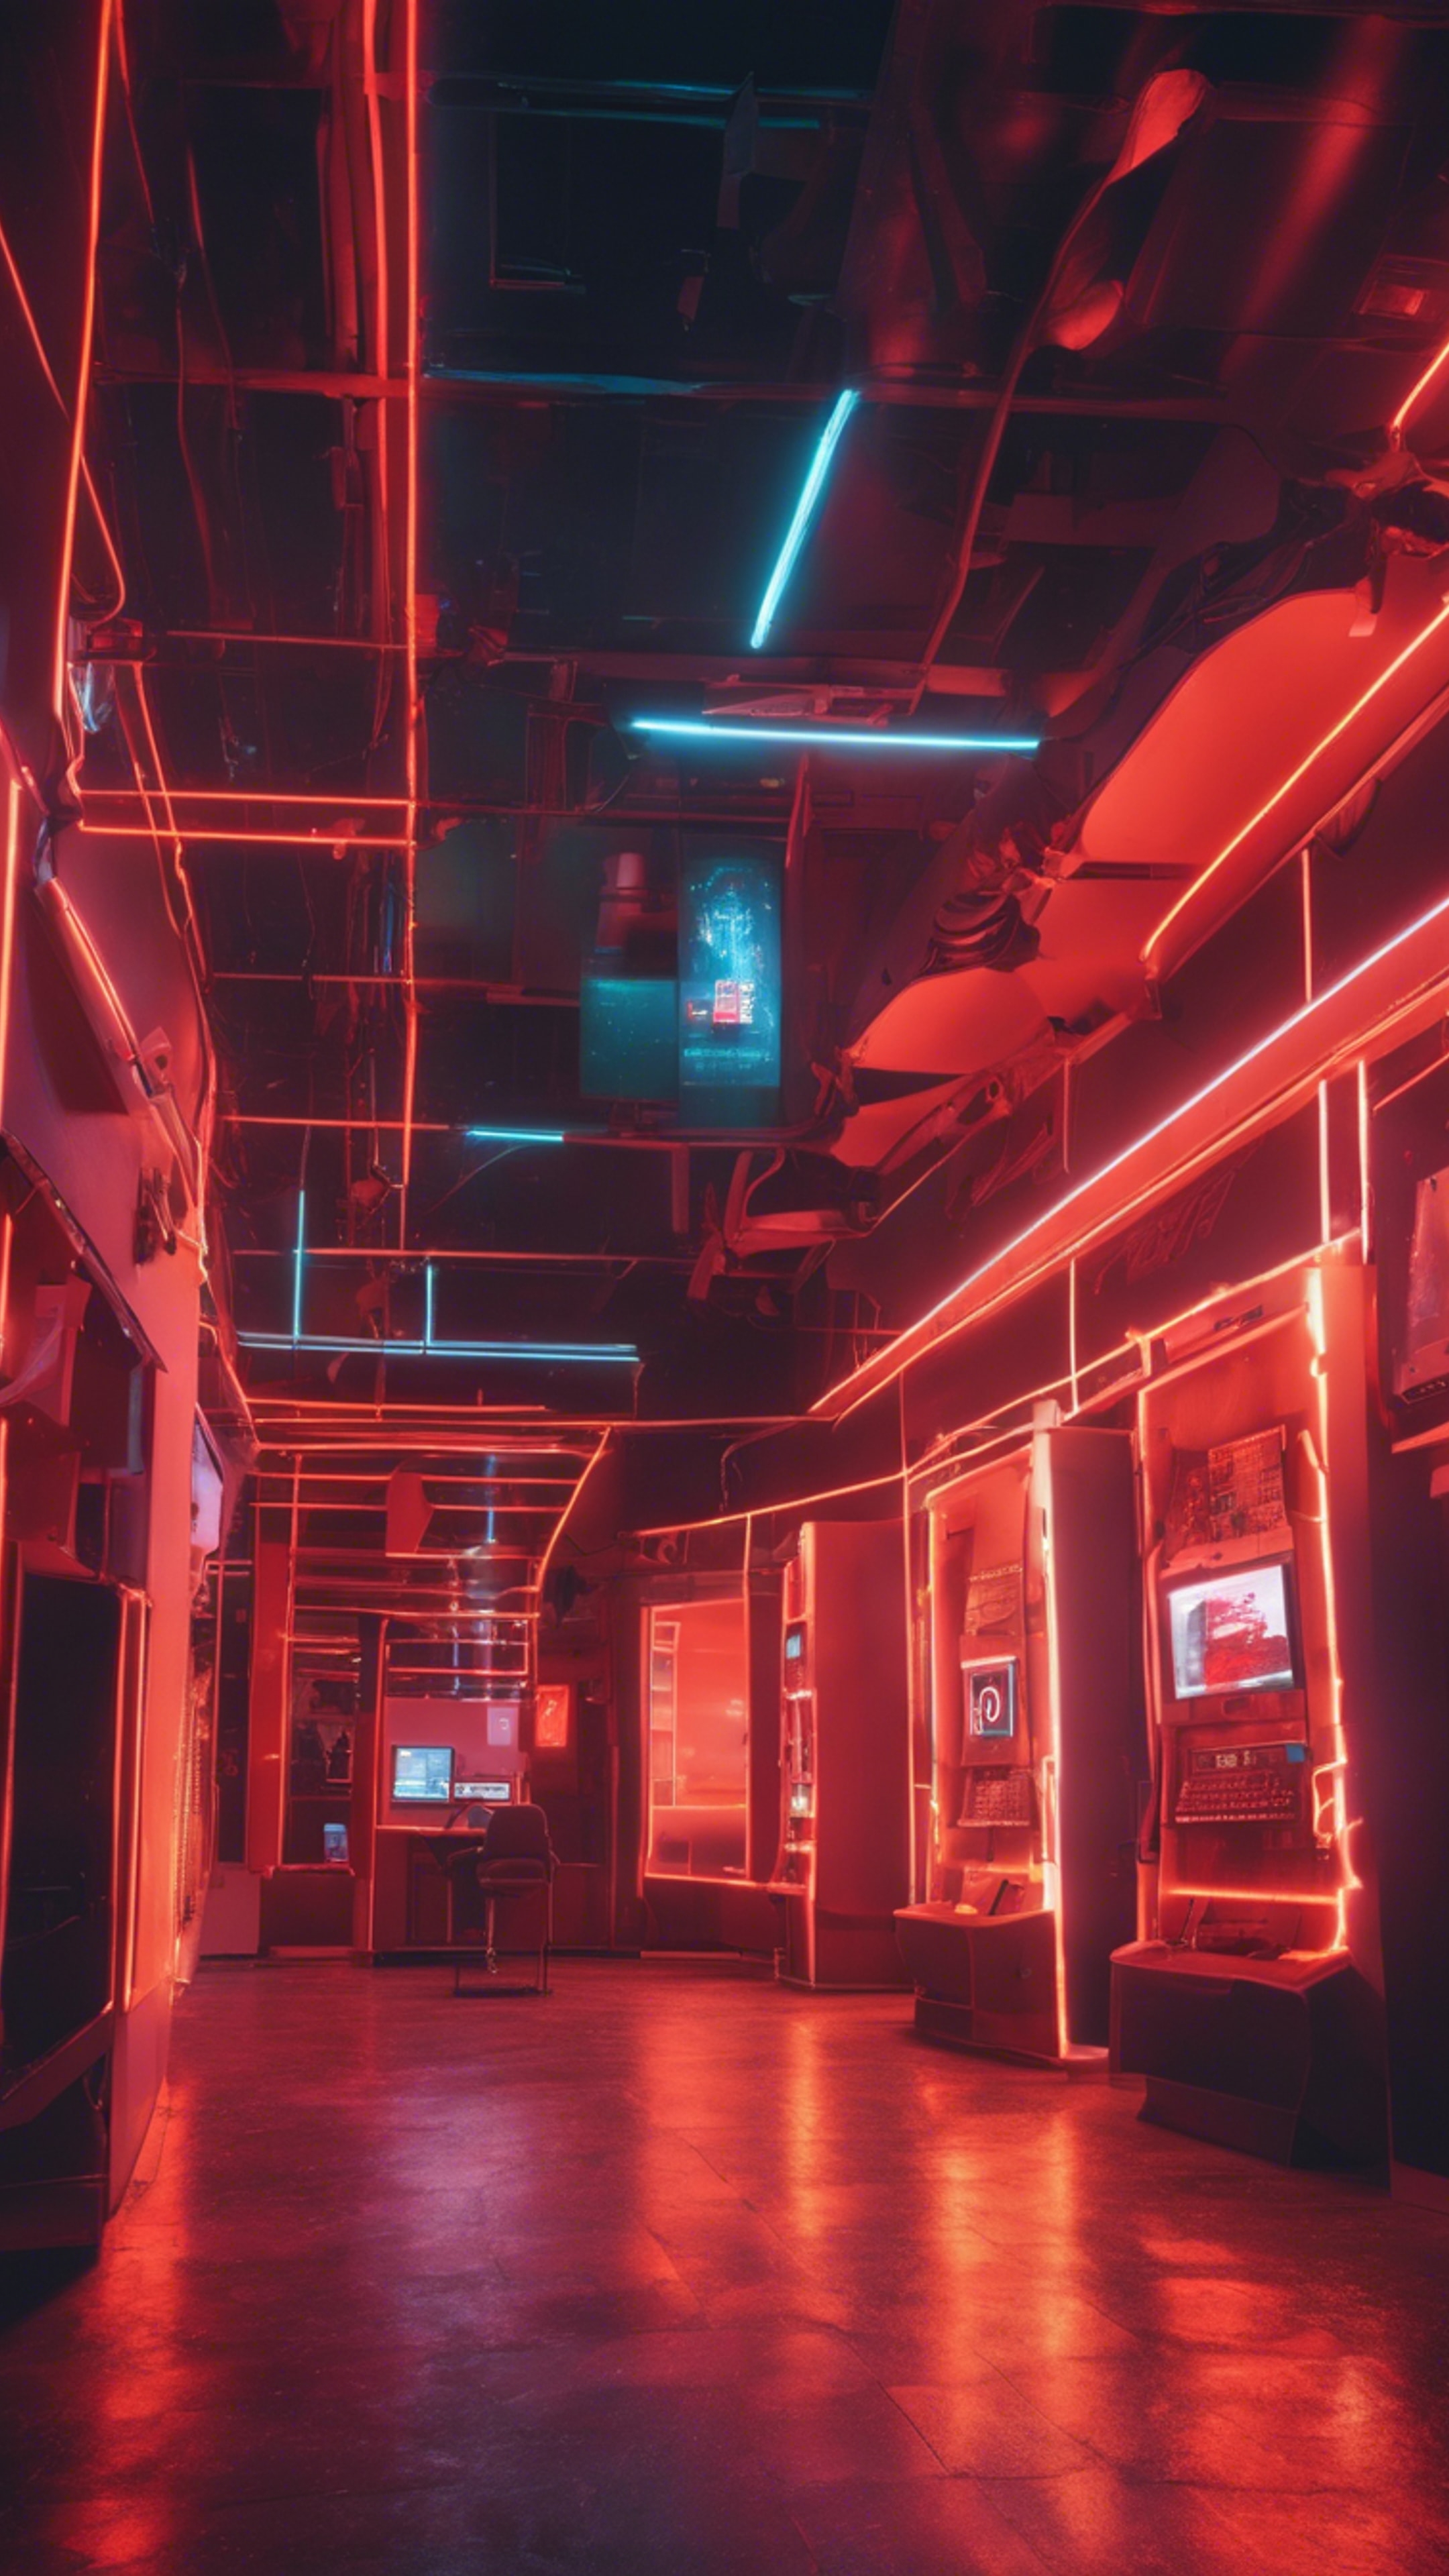 An architecturally unique cyber cafe glowing with neon red and orange lights at night. Fond d'écran[37c23e18da0f466d9ff8]